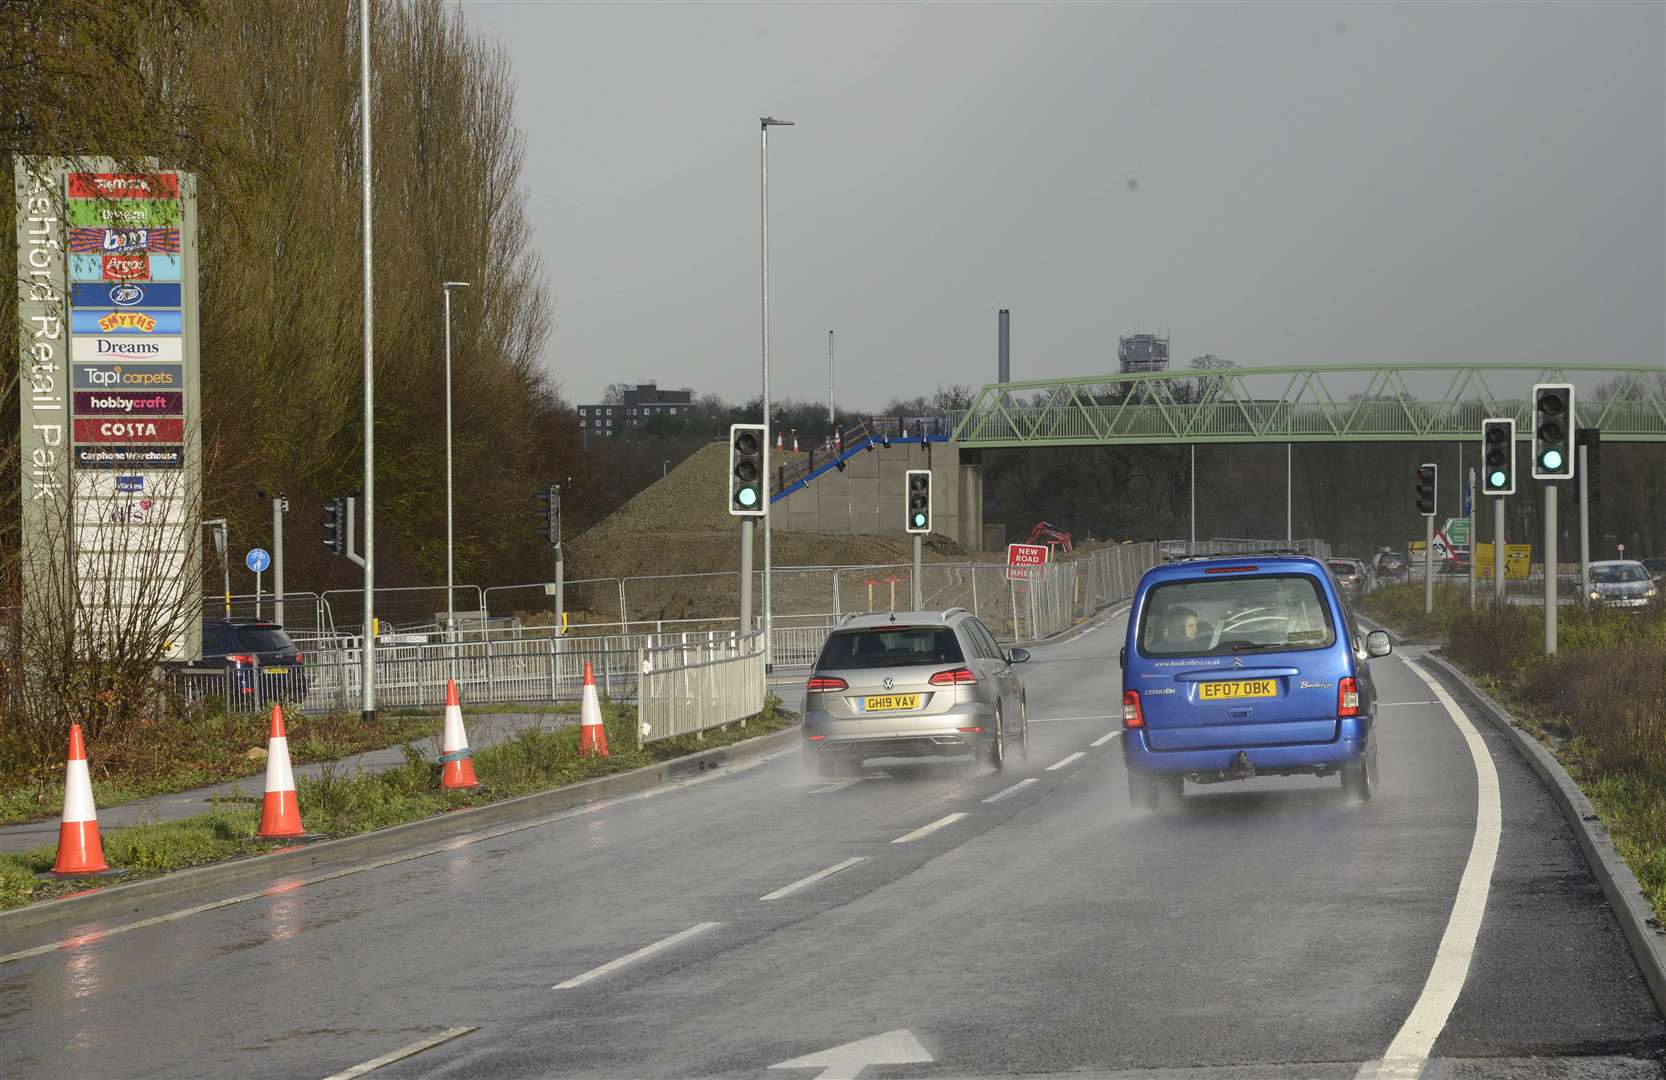 Traffic lights were installed at the access point off the A2070 dual carriageway in late 2019